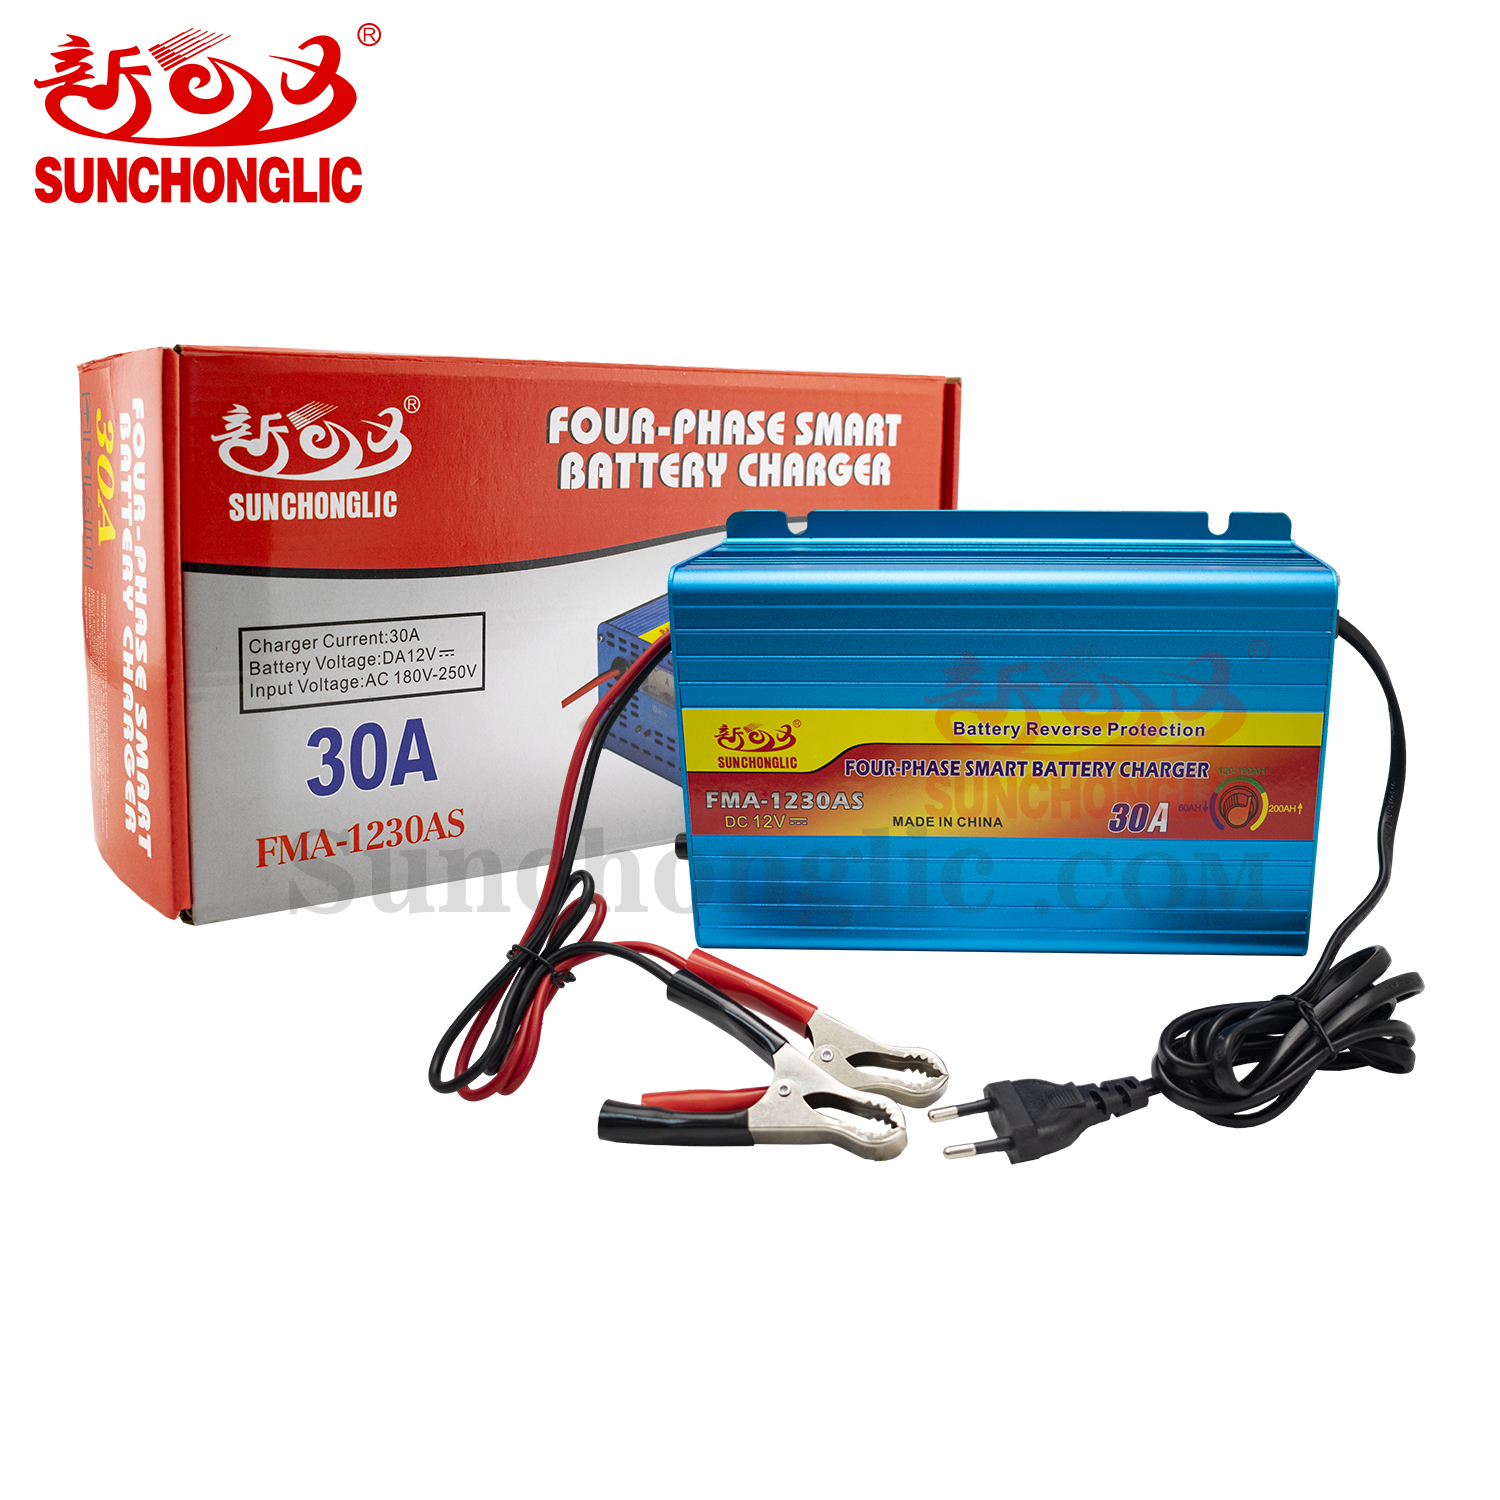 Sunchonglic Four-phase 12v 30A 30amp smart lead acid car battery charger